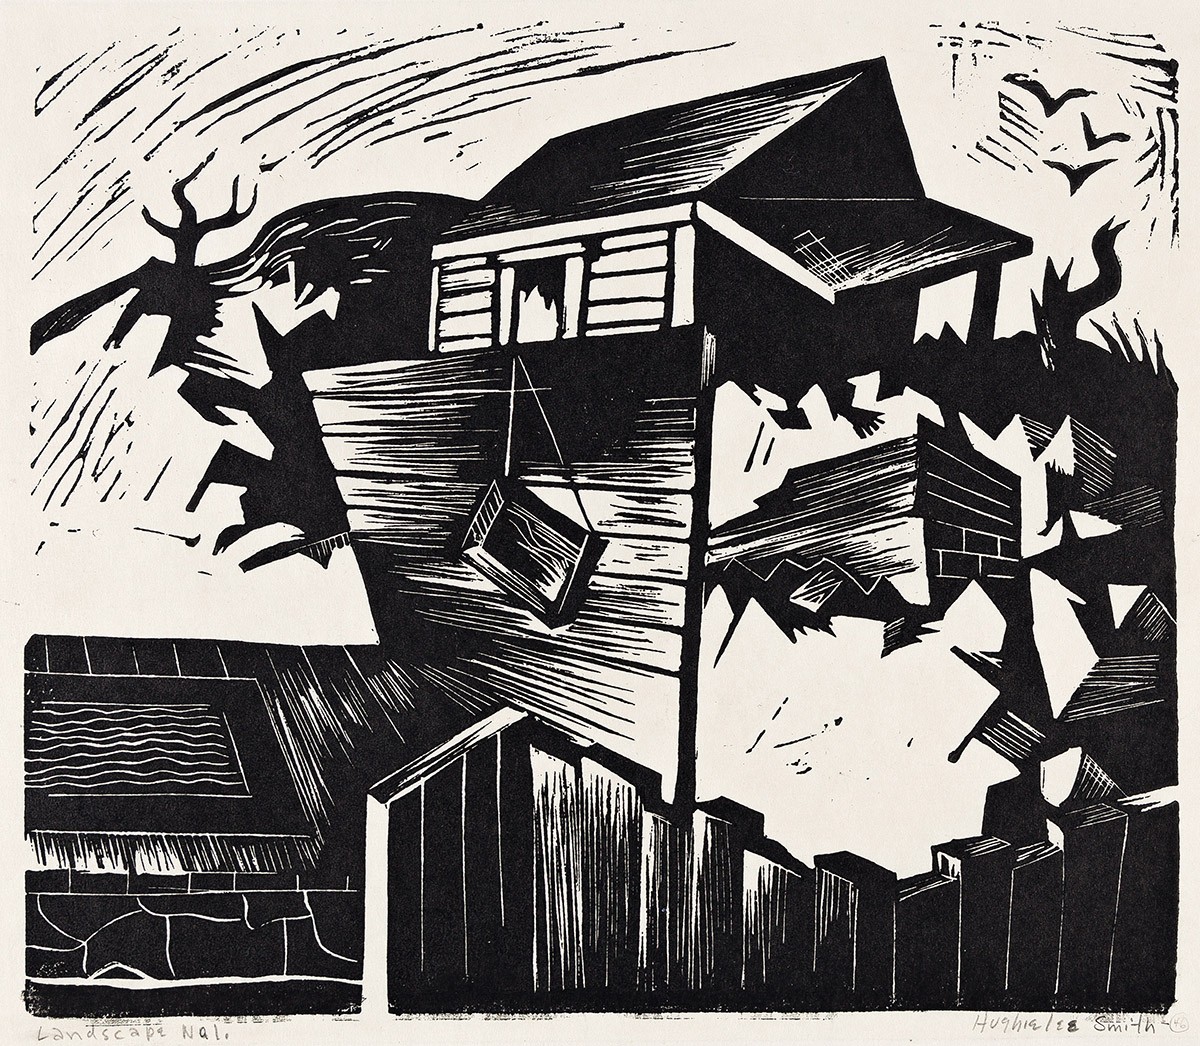 A black and white print of a house on a hill.